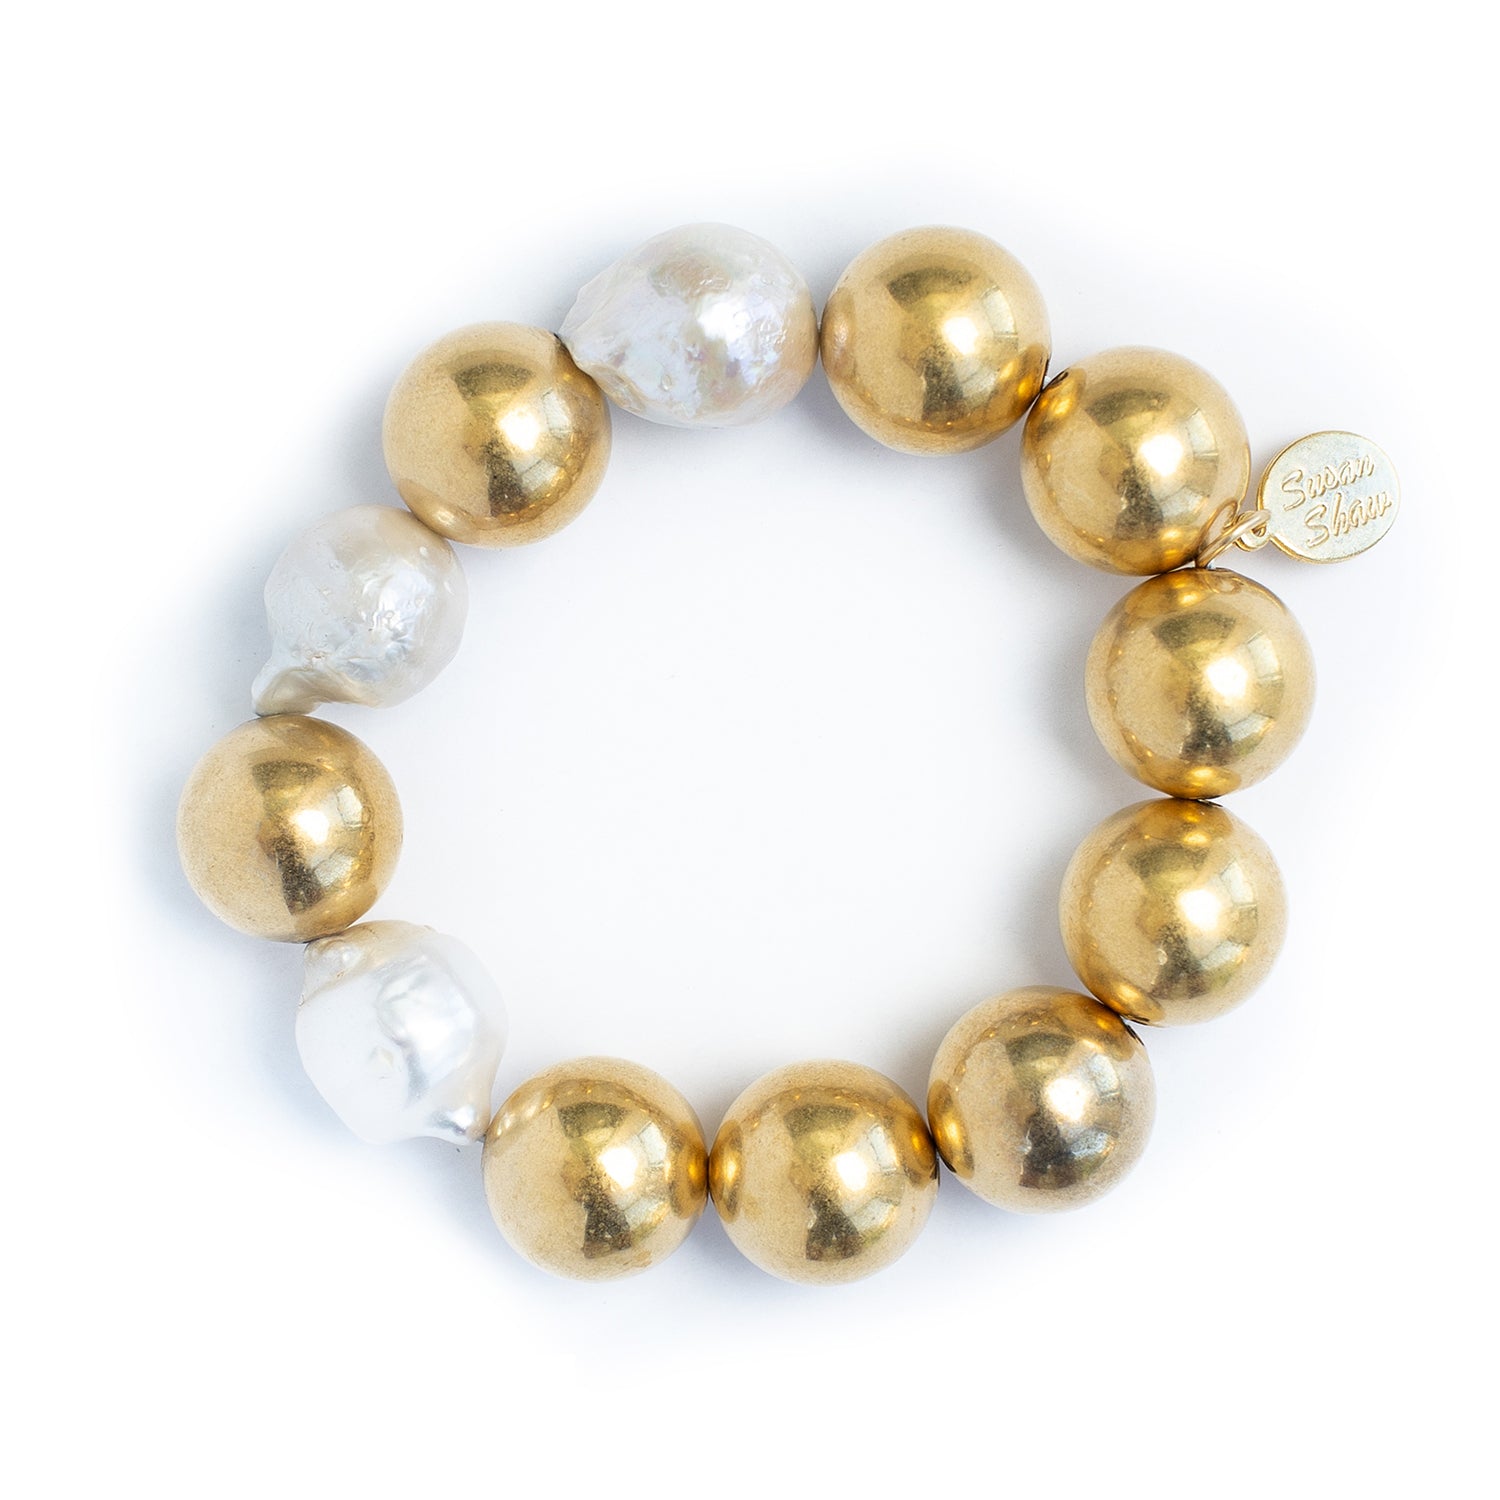 Susan Shaw Handcast 16MM Gold Plated Balls & Large Genuine Freshwater Baroque Pearl Stretch Bracelet